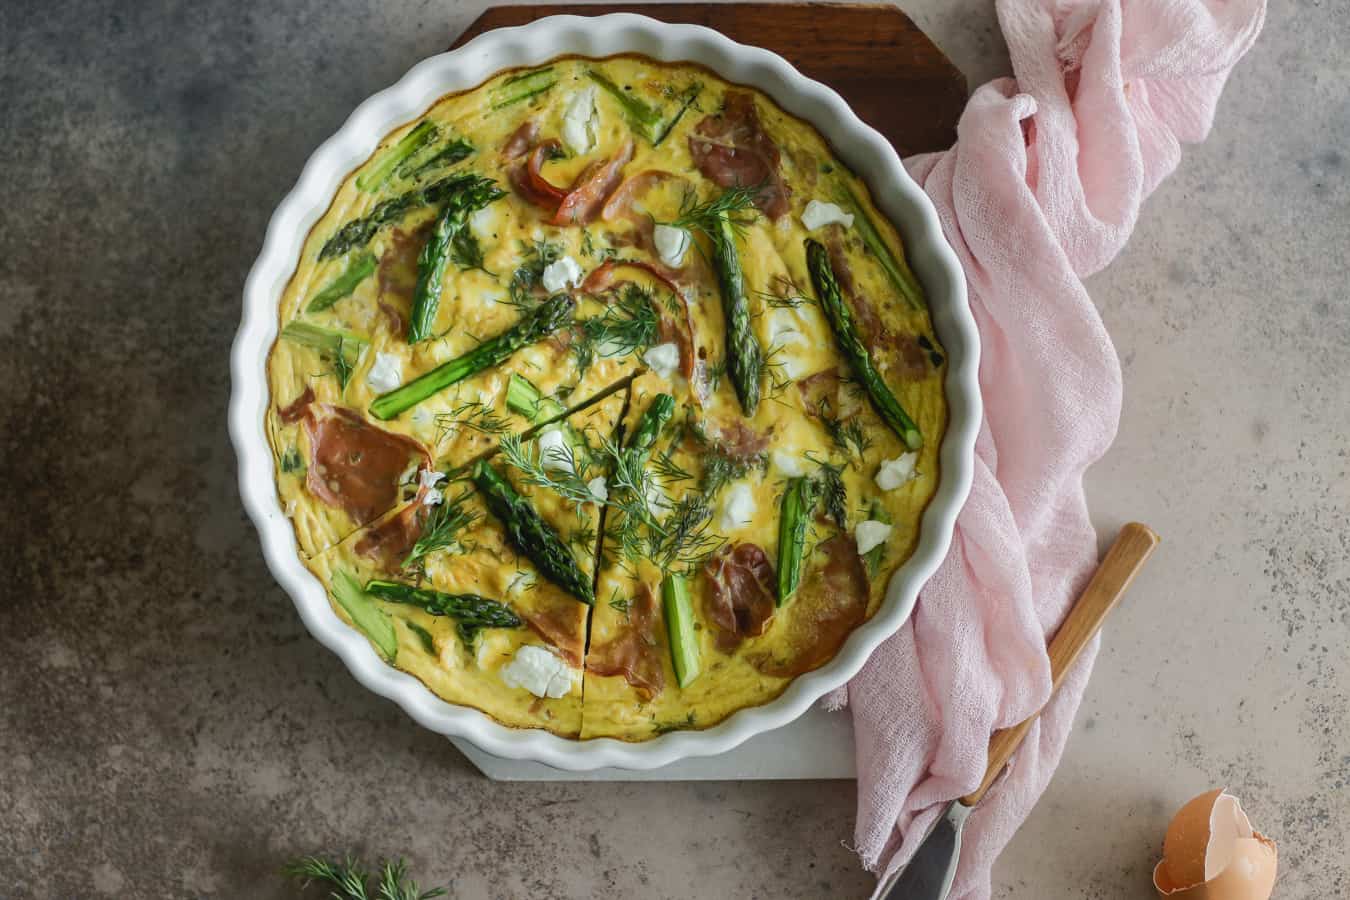 Asparagus and Prosciutto Baked Frittata Casserole